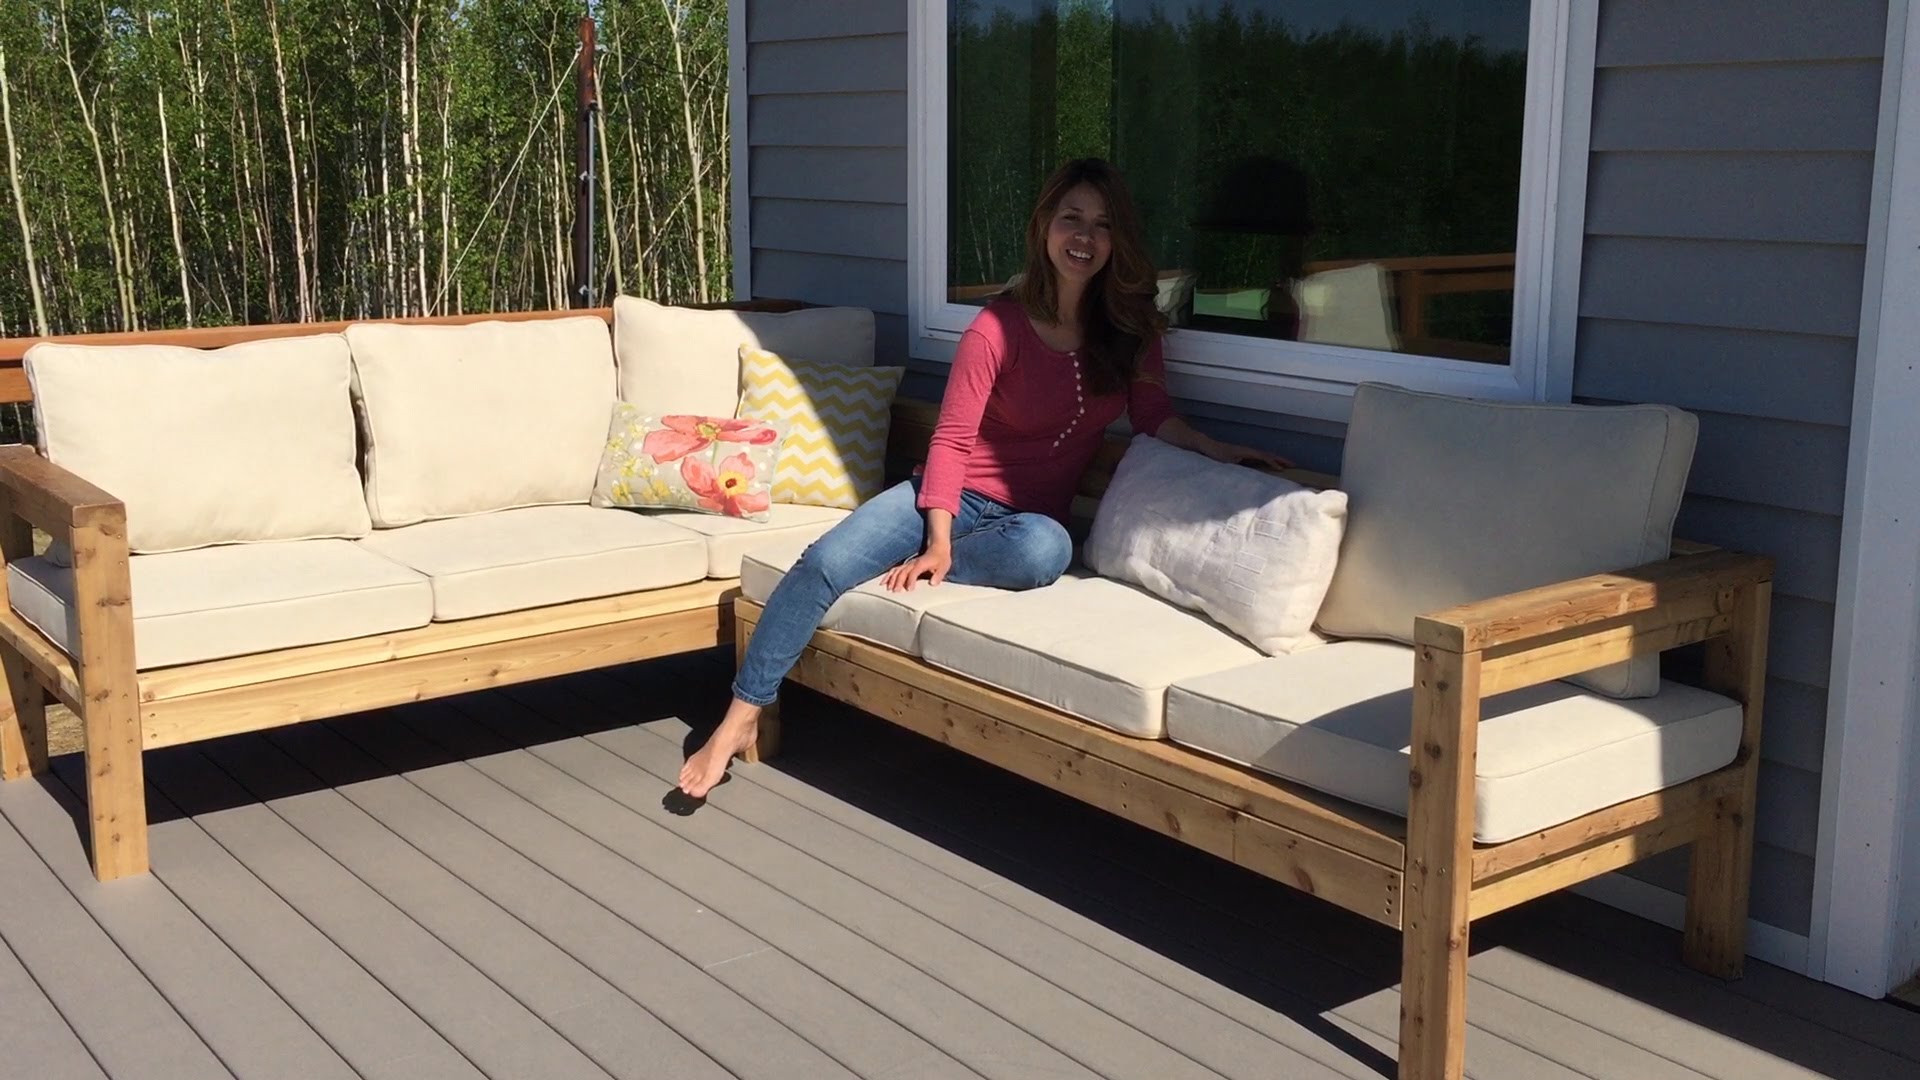 DIY Outdoor Sectional
 How To Build A Cozy 2X4 Sectional Sofa for Outdoor Patio